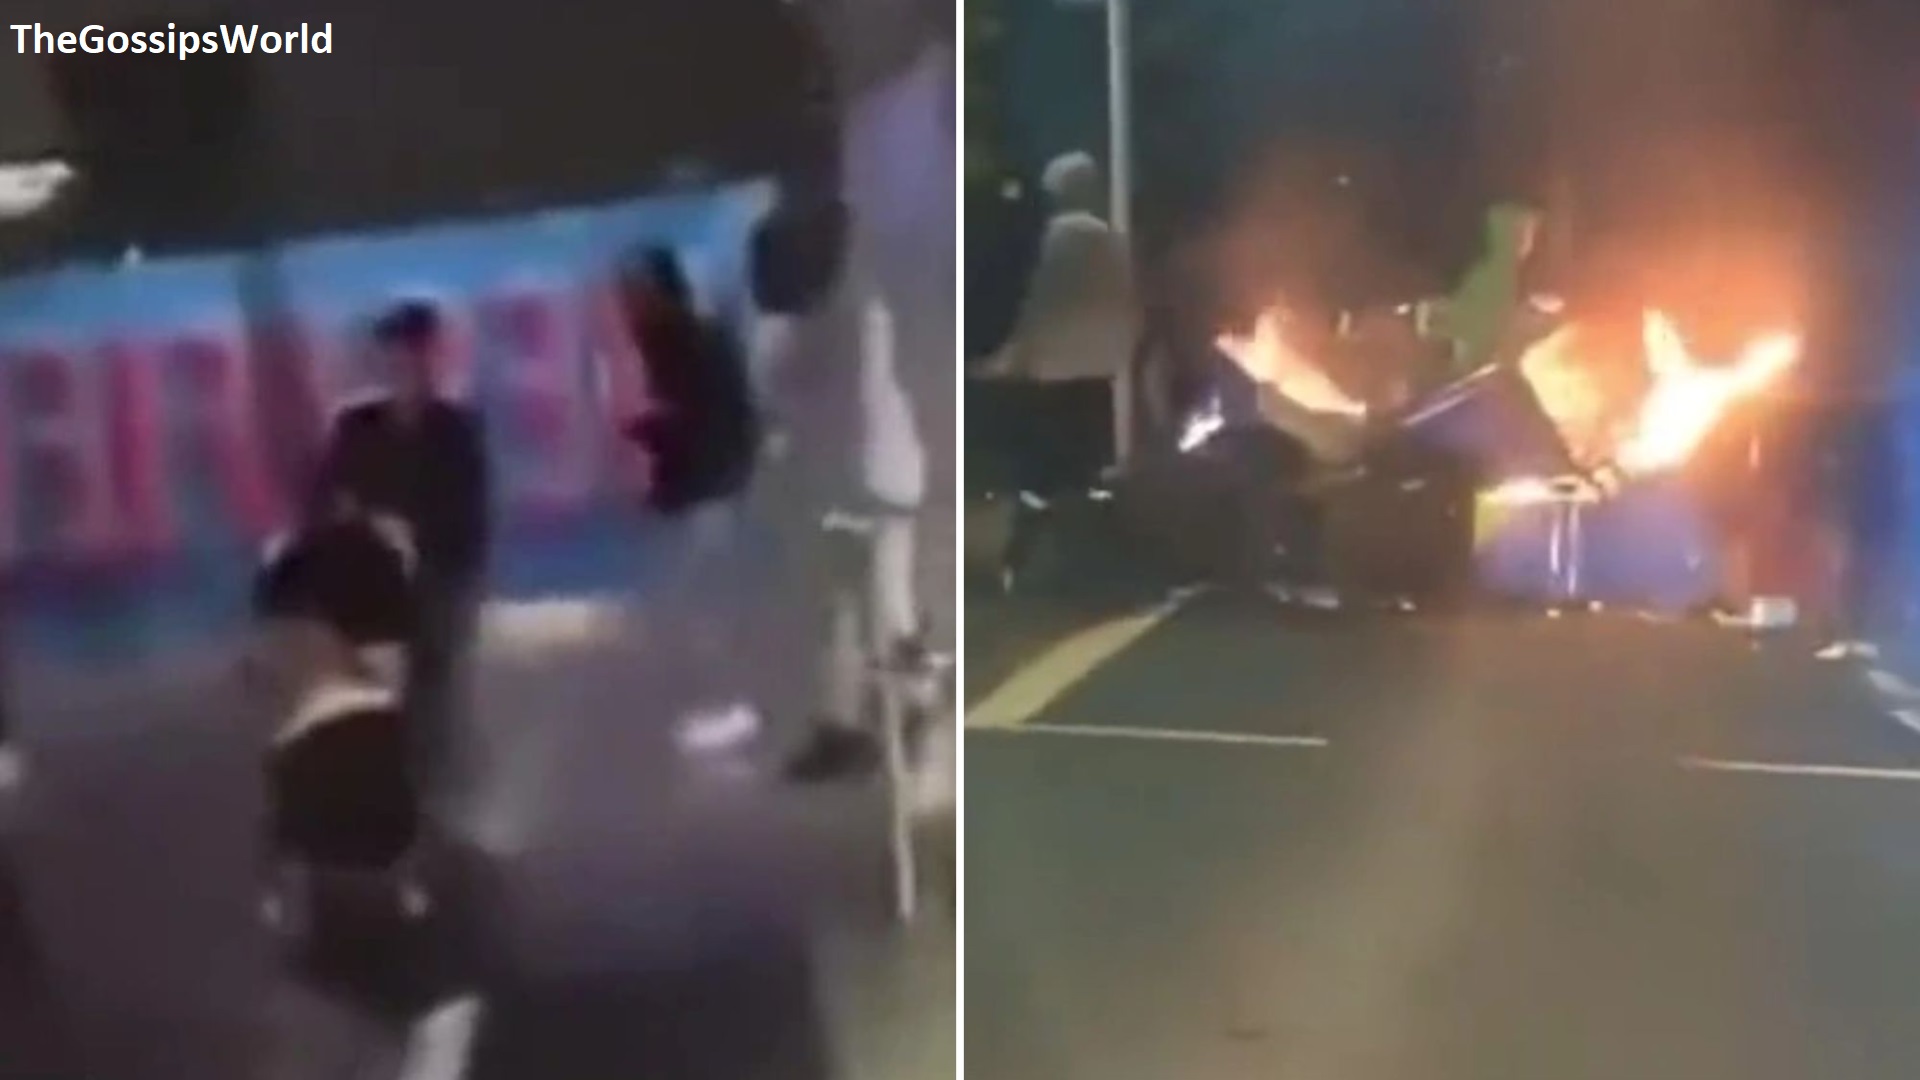 A Mum & Her Baby Caught In Fire As A Teen Spark Fireworks During Halloween Video